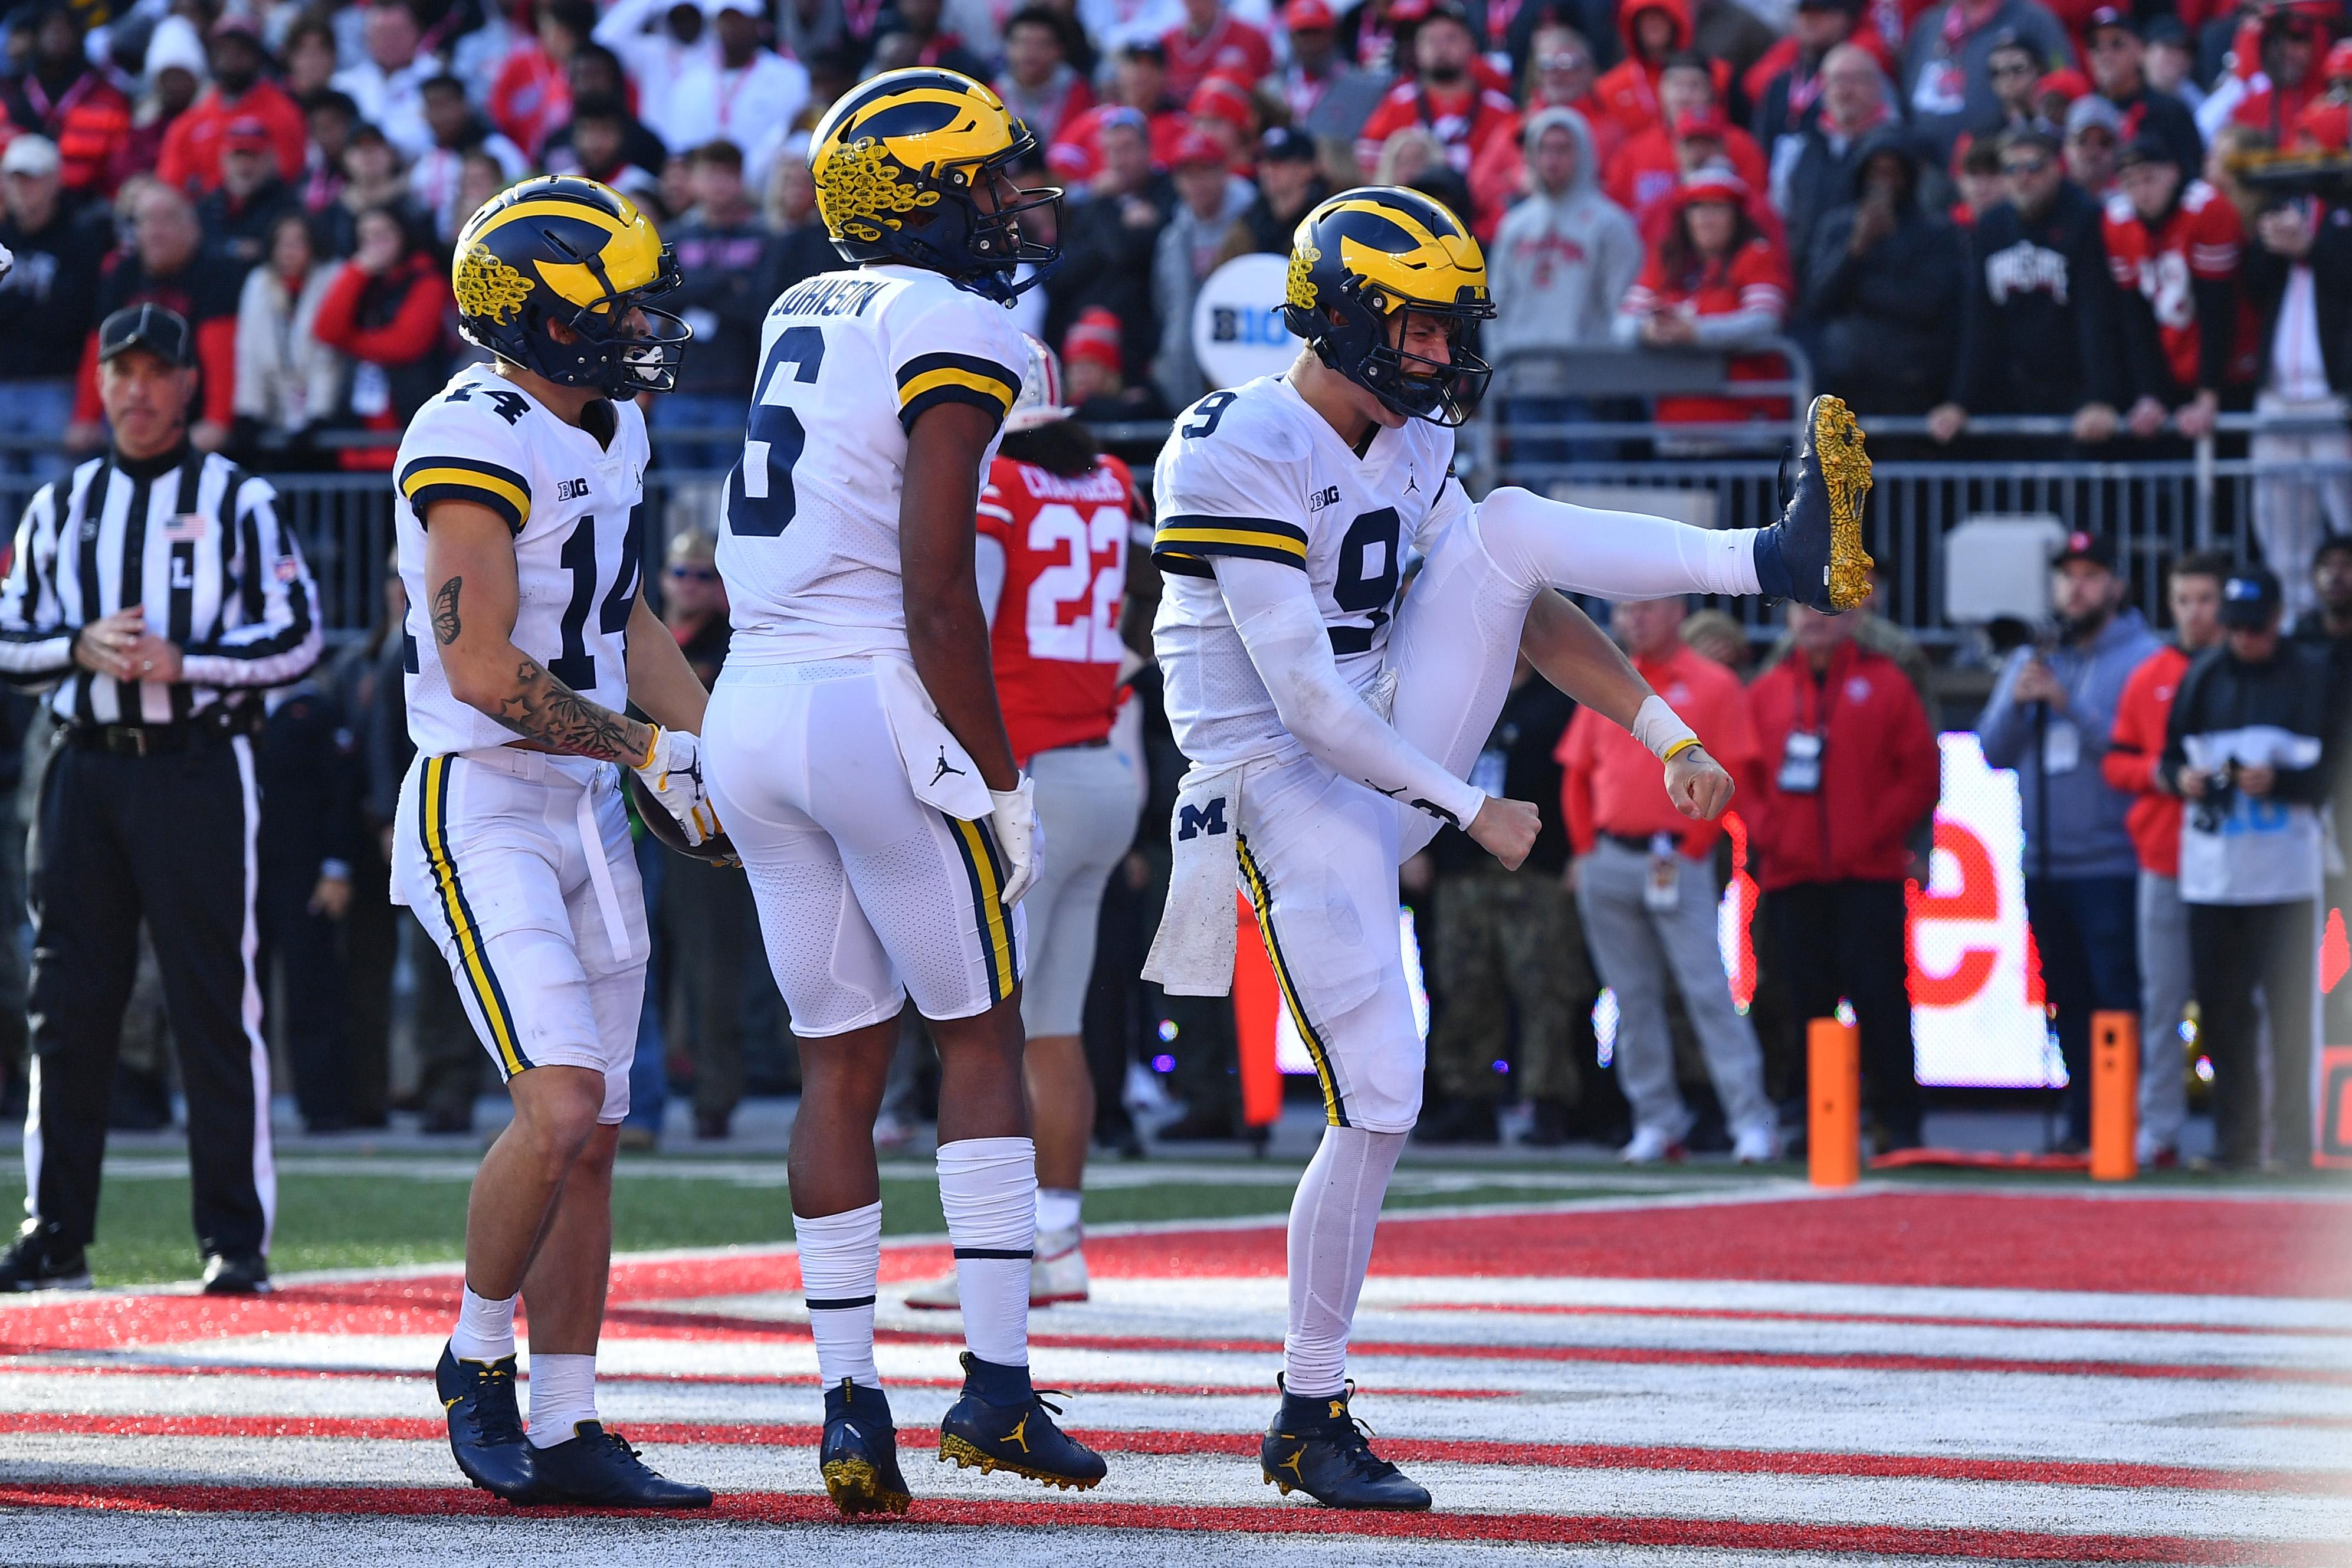 Three Michigan players in the end zone celebrate 